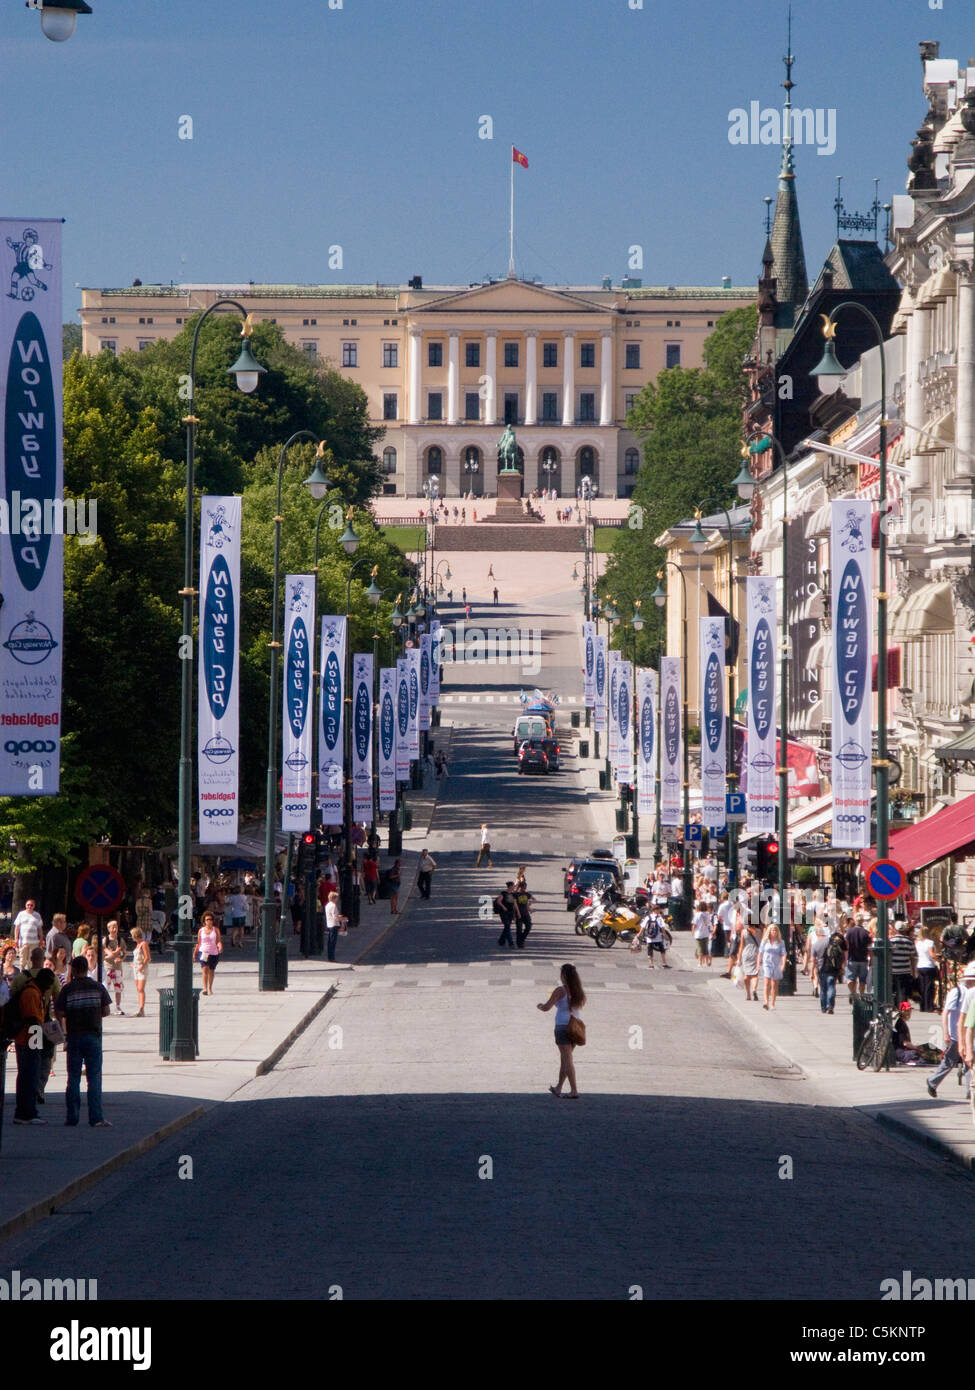 Royal Palace (Slottet) and Karl Johans Gate with banners for Norway Cup youth football (soccer) tournament, Oslo, Norway Stock Photo